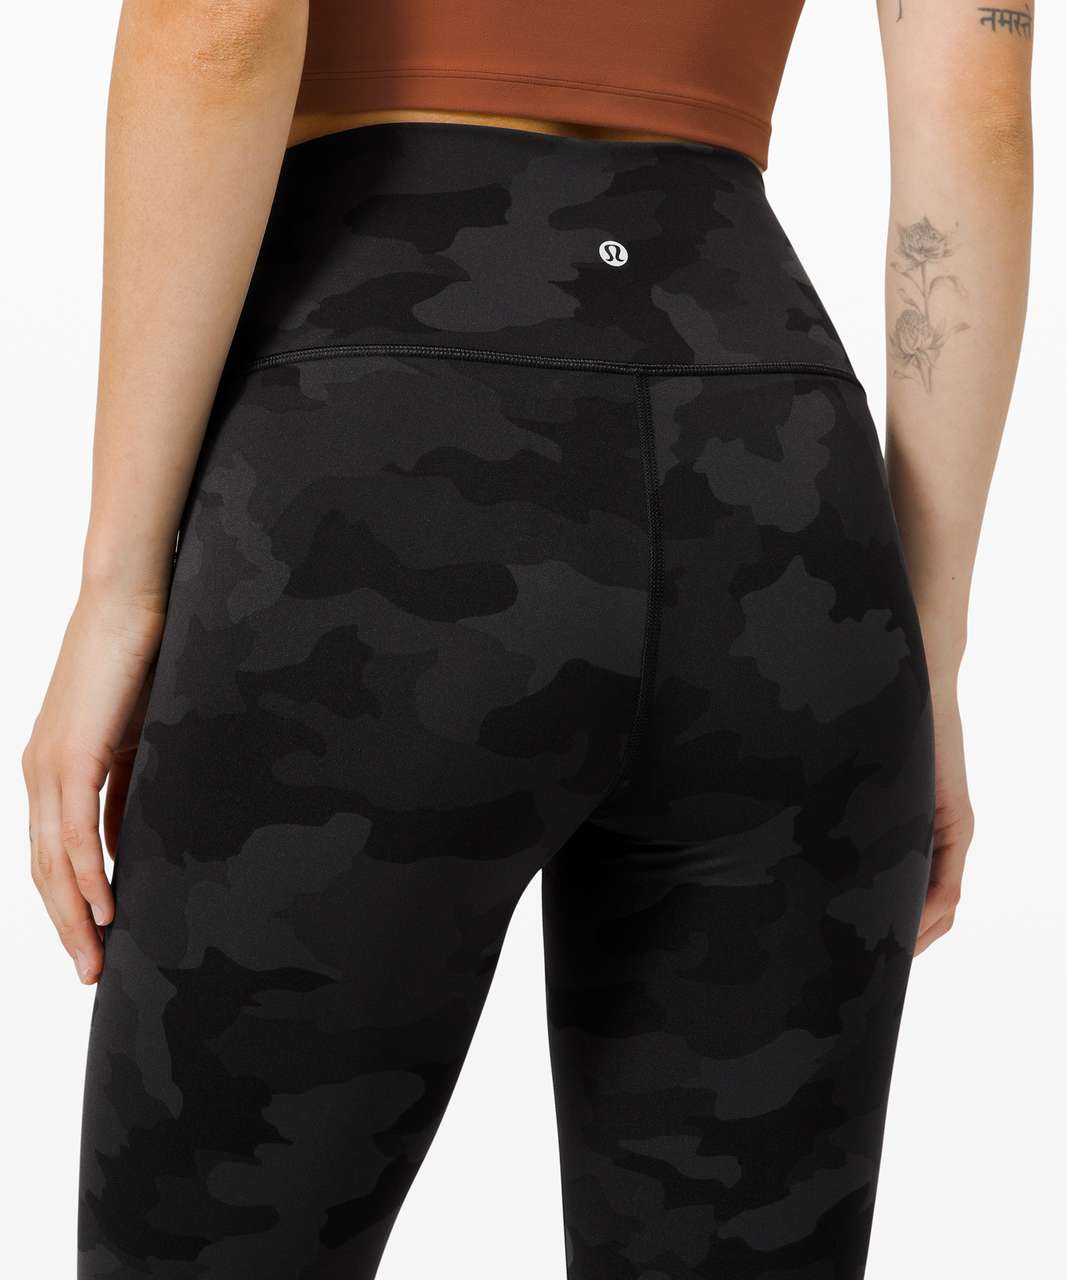 Lululemon Try-Ons: Ready To Rulu Pant Incognito Camo, Lululemon X Roksanda  Skirt and Crops - The Sweat Edit